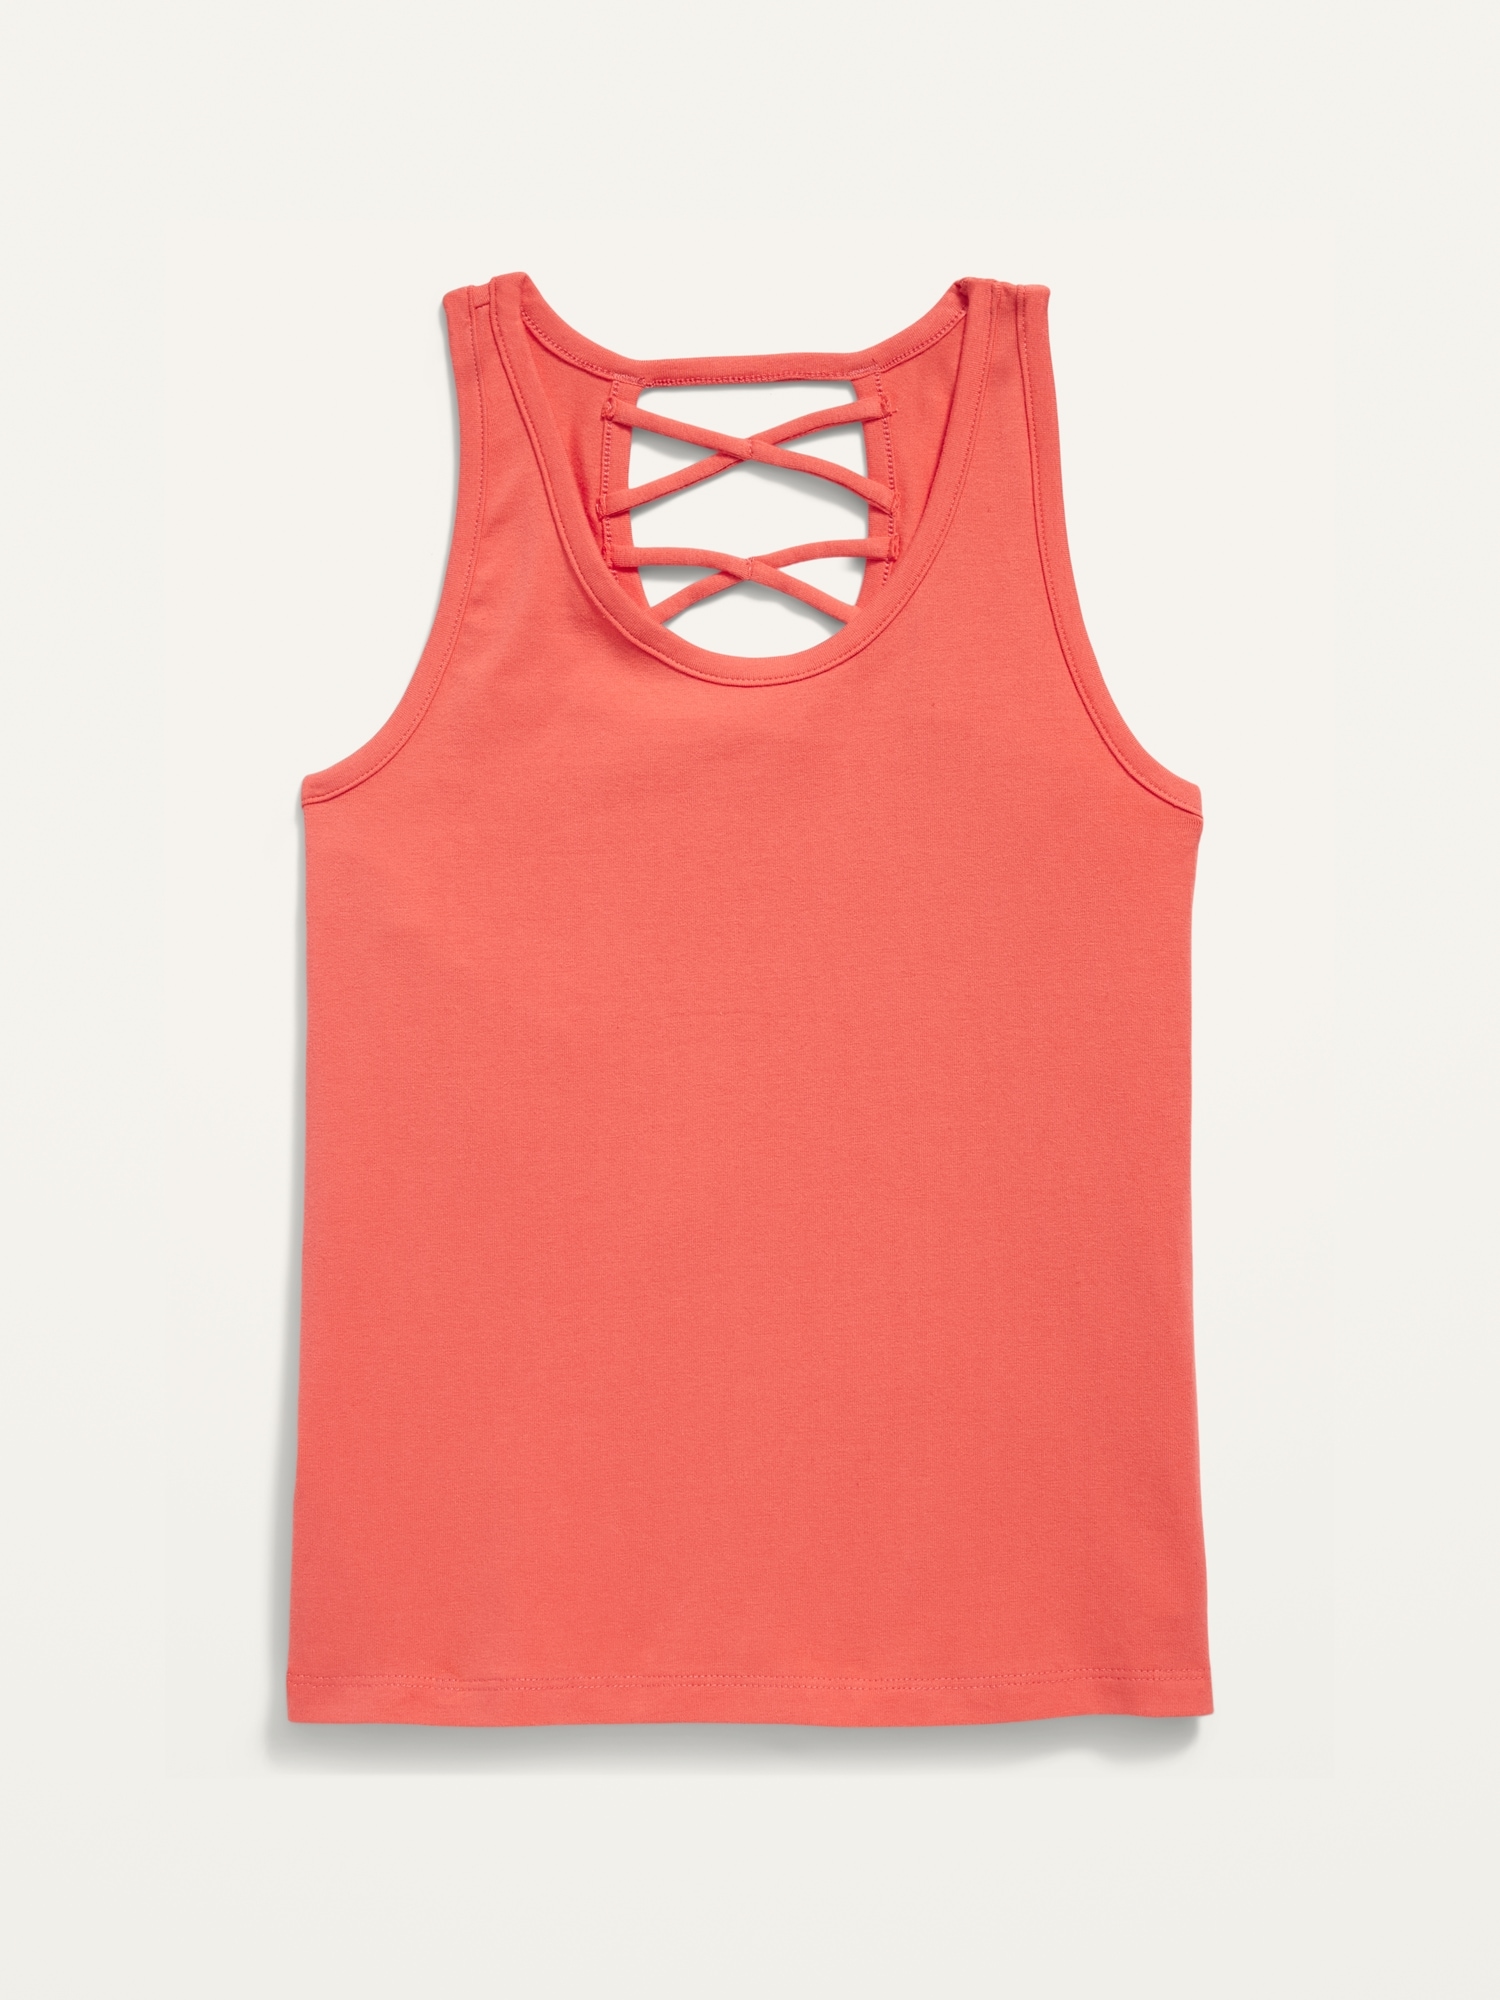 Fitted Lattice-Back Tank Top for Girls On Sale At Old Navy